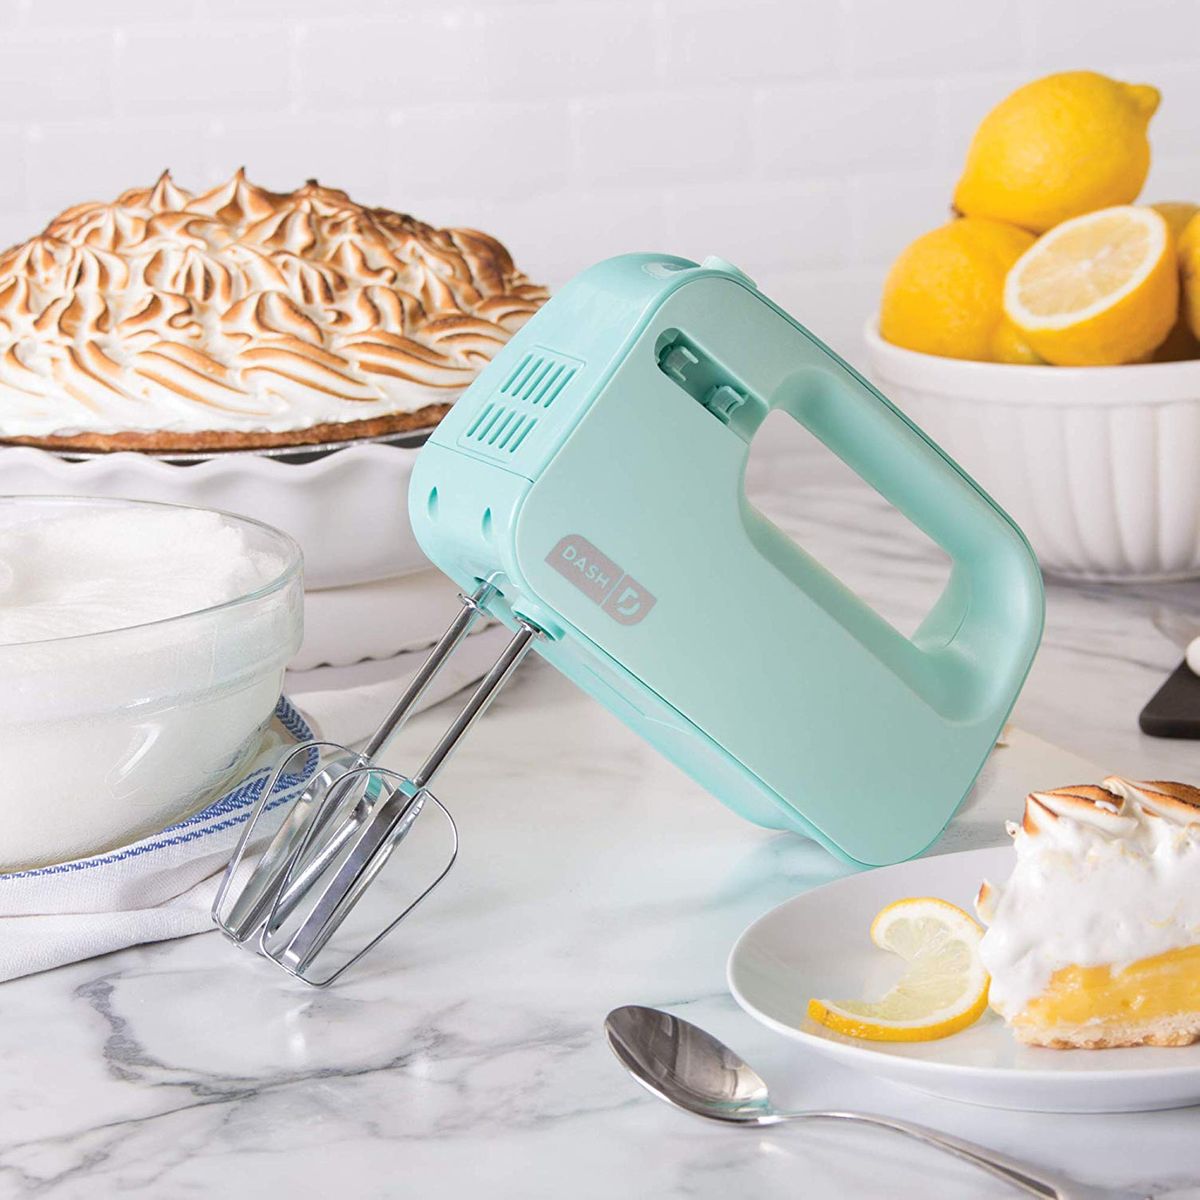 hand mixer with timer